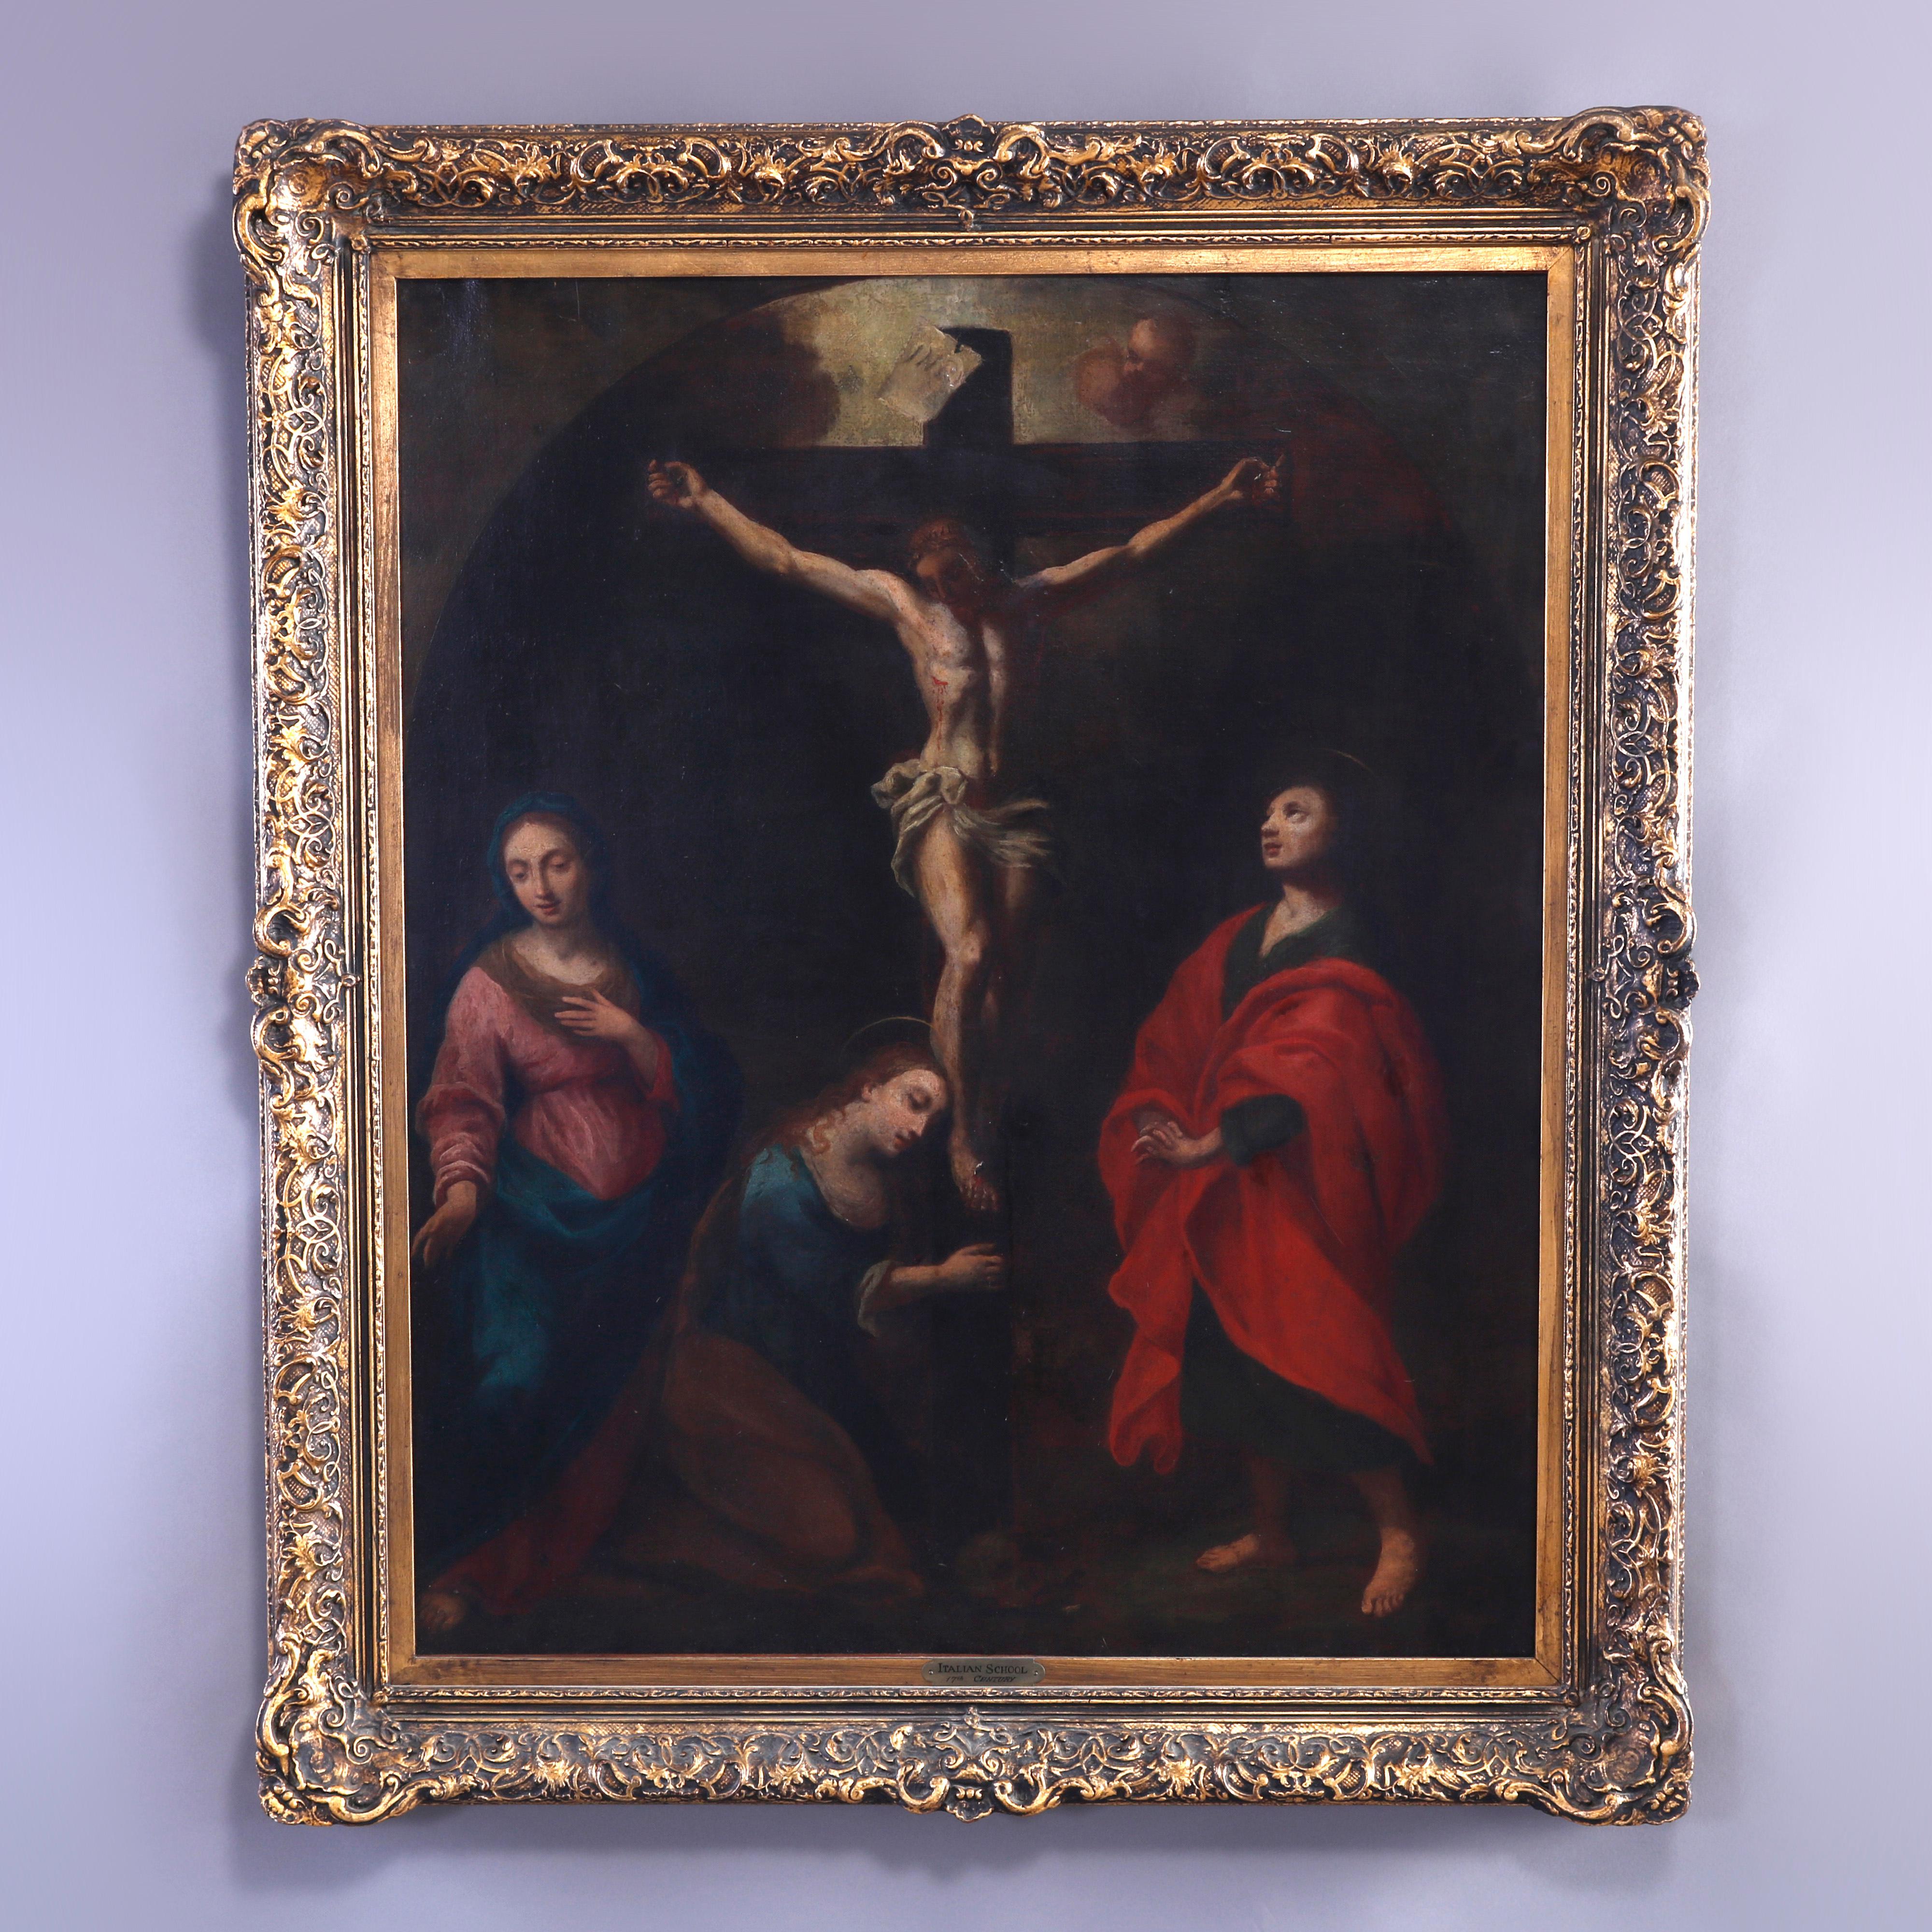 An antique Italian School painting offers oil on canvas depiction of the Crucifixion of Jesus Christ, seated in giltwood frame, 19th century

Measures - overall 41.25''H x 35''W x 3''D.